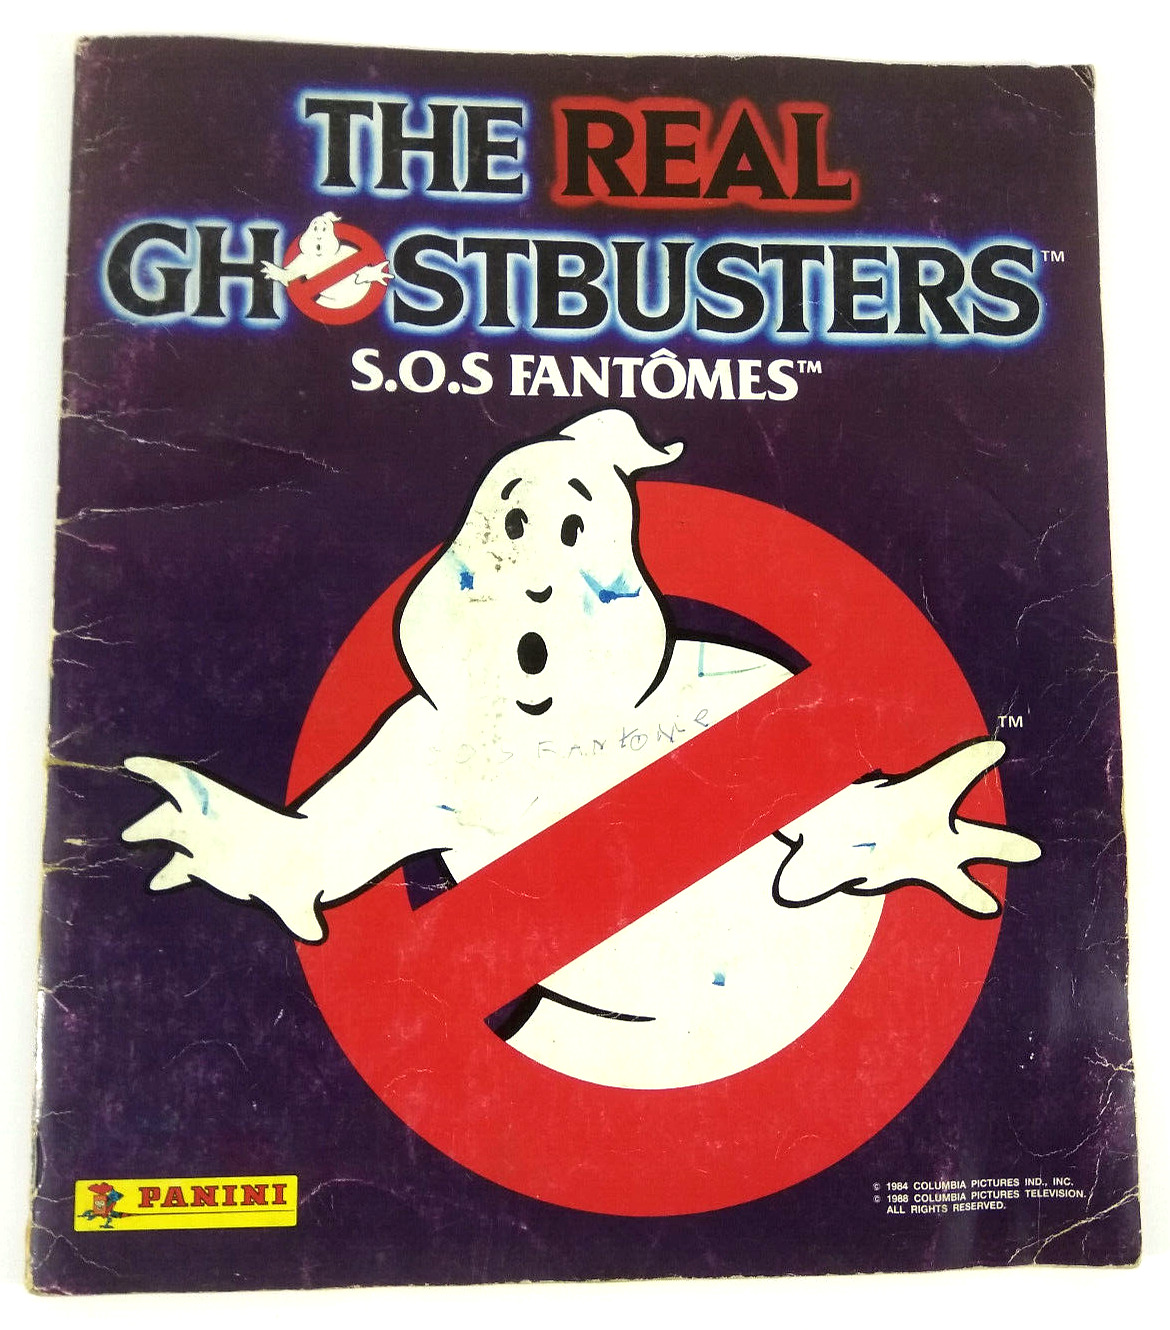 Panini Ghostbusters SOS Ghostbusters Incomplete Album Fast Shipping & Tracking